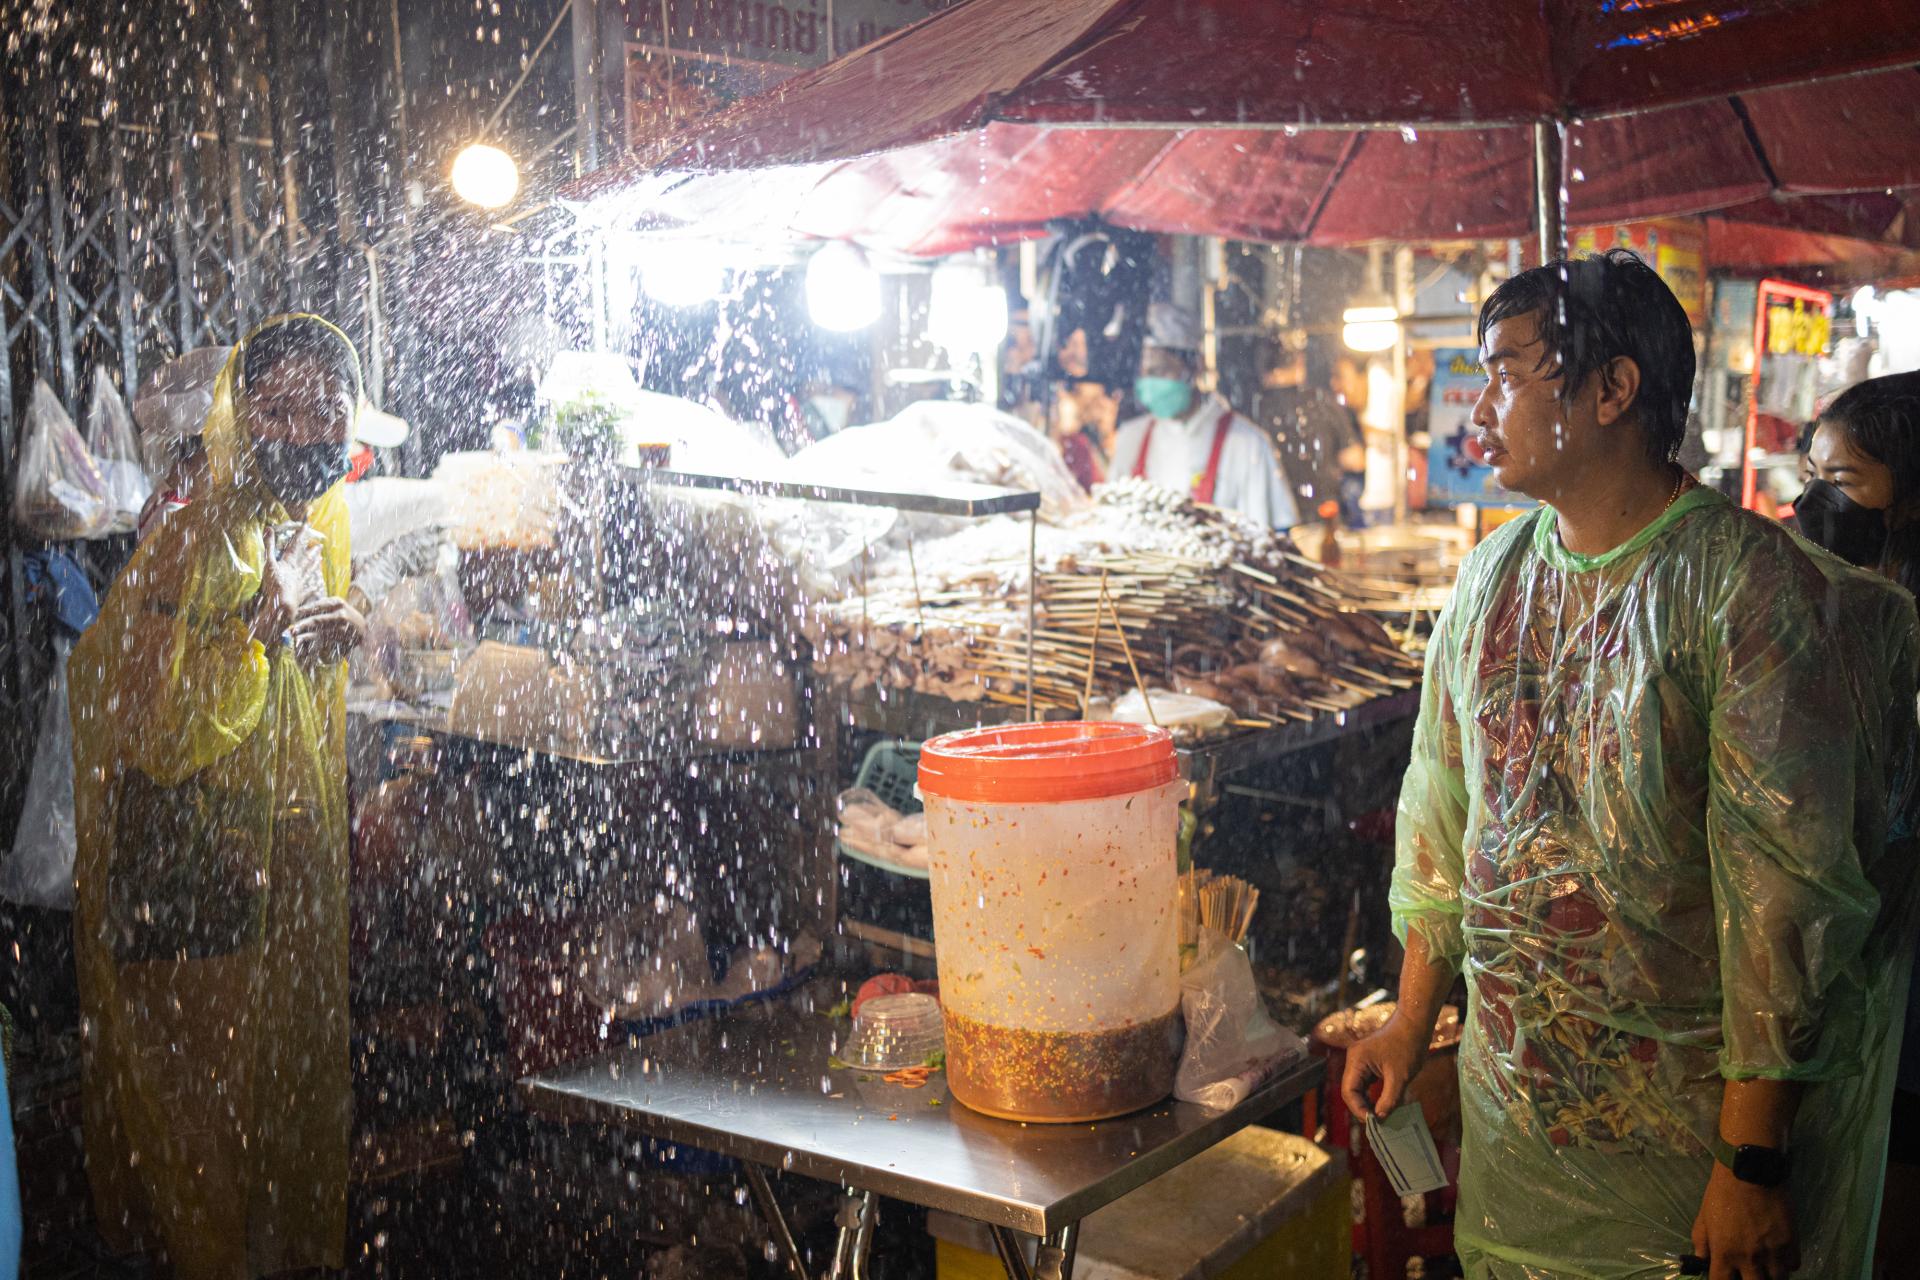 London Photography Awards Winner - A Journey into the Culture of Streetfood